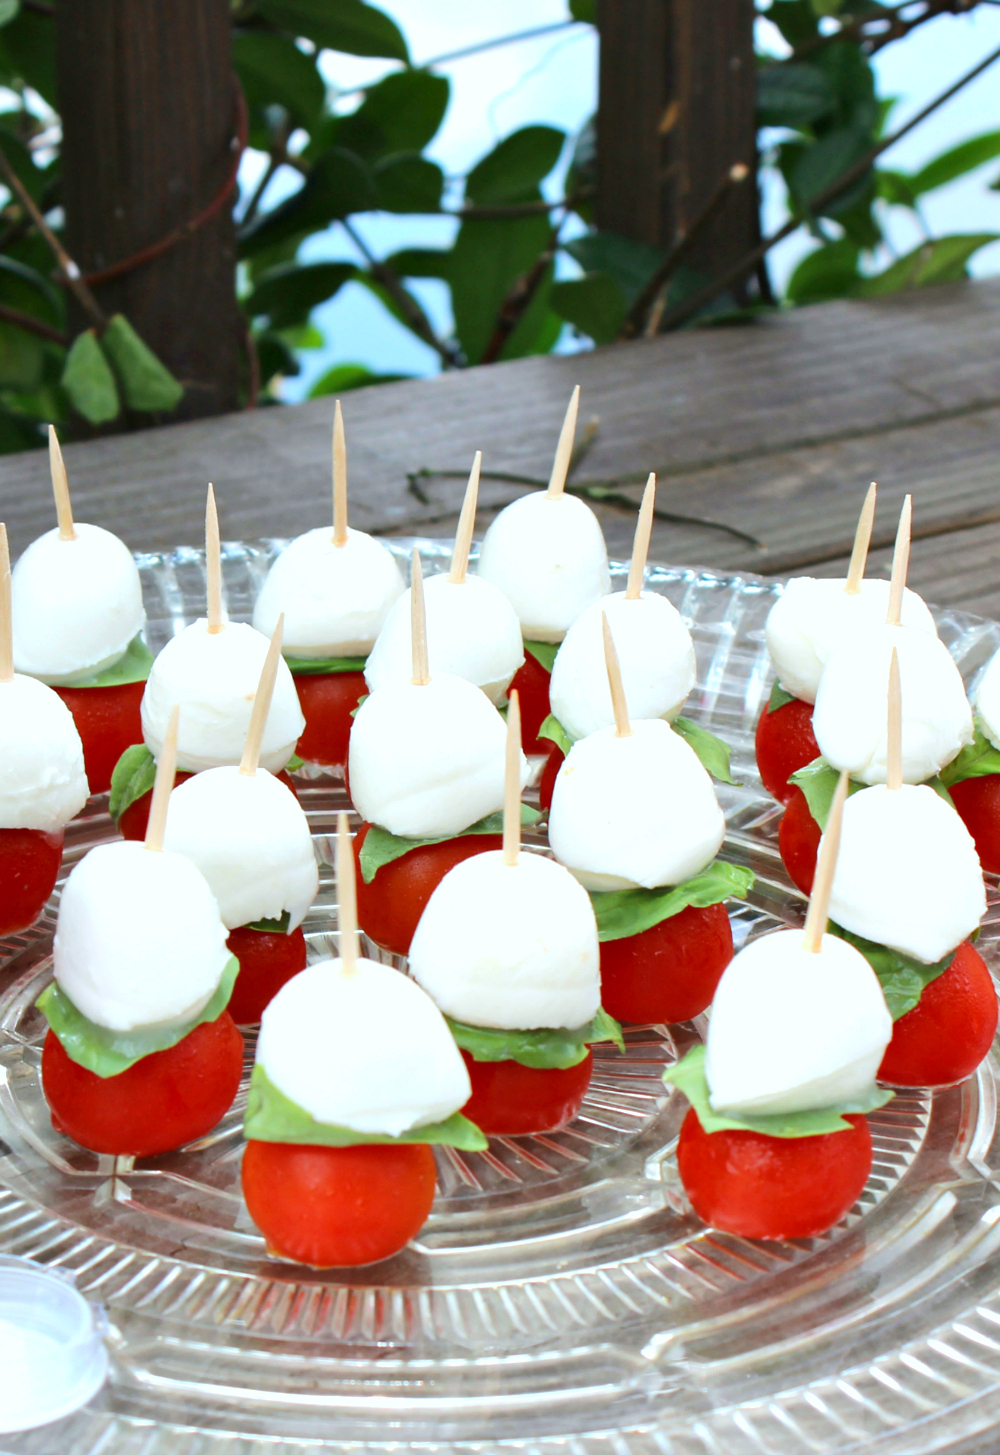 Looking for an easy summer appetizer? These caprese bites are a crowd favorite!